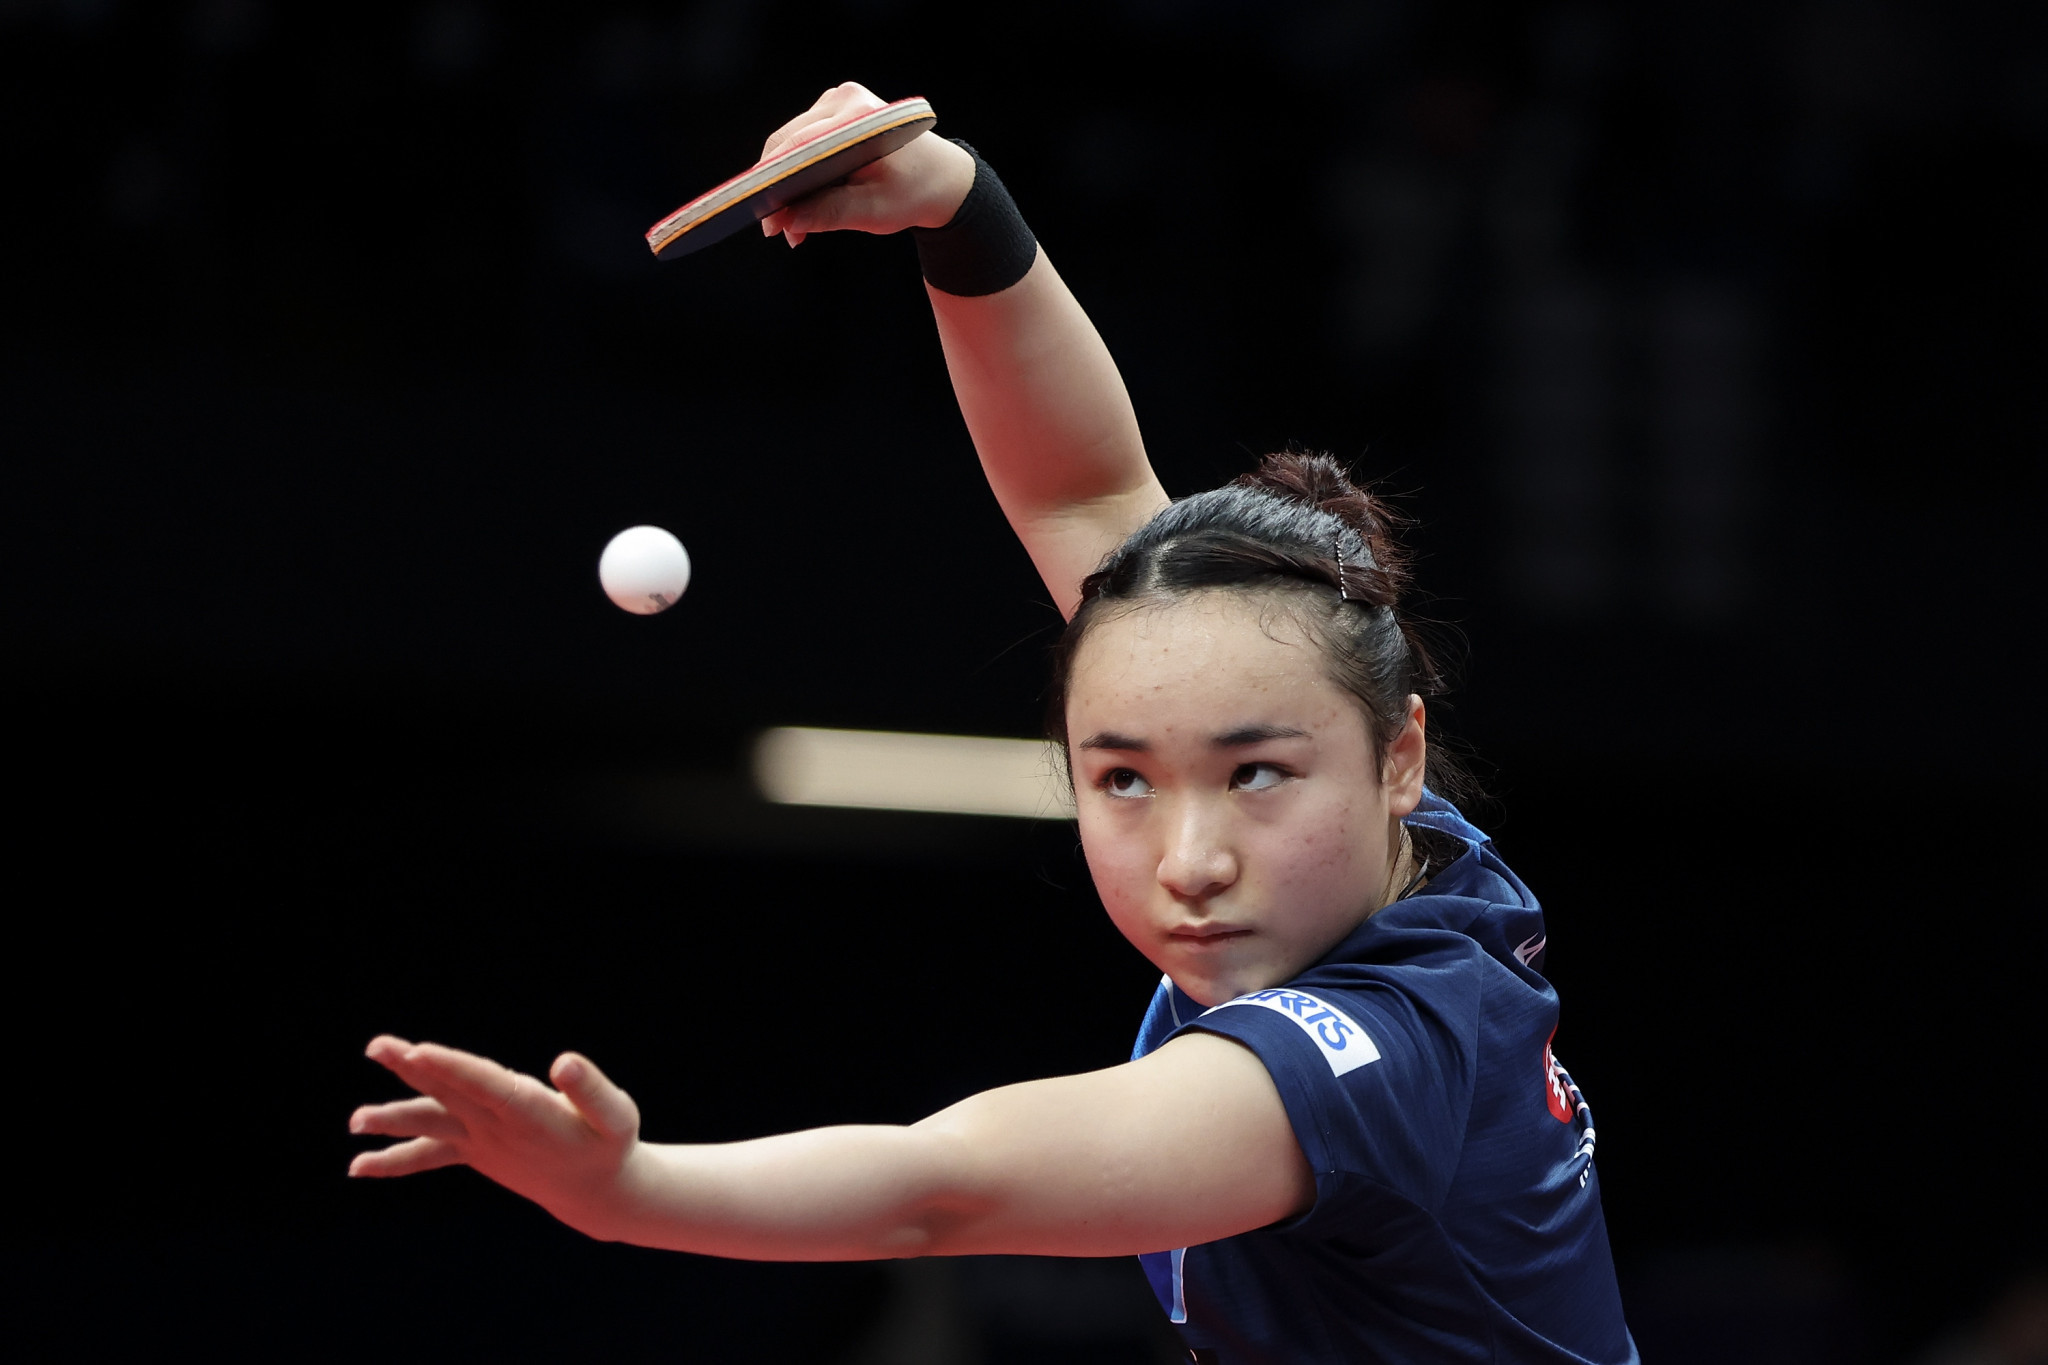 Japan's Mima Ito came through a seven-game match to reach the fourth round of the World Table Tennis Championships in Houston ©Getty Images